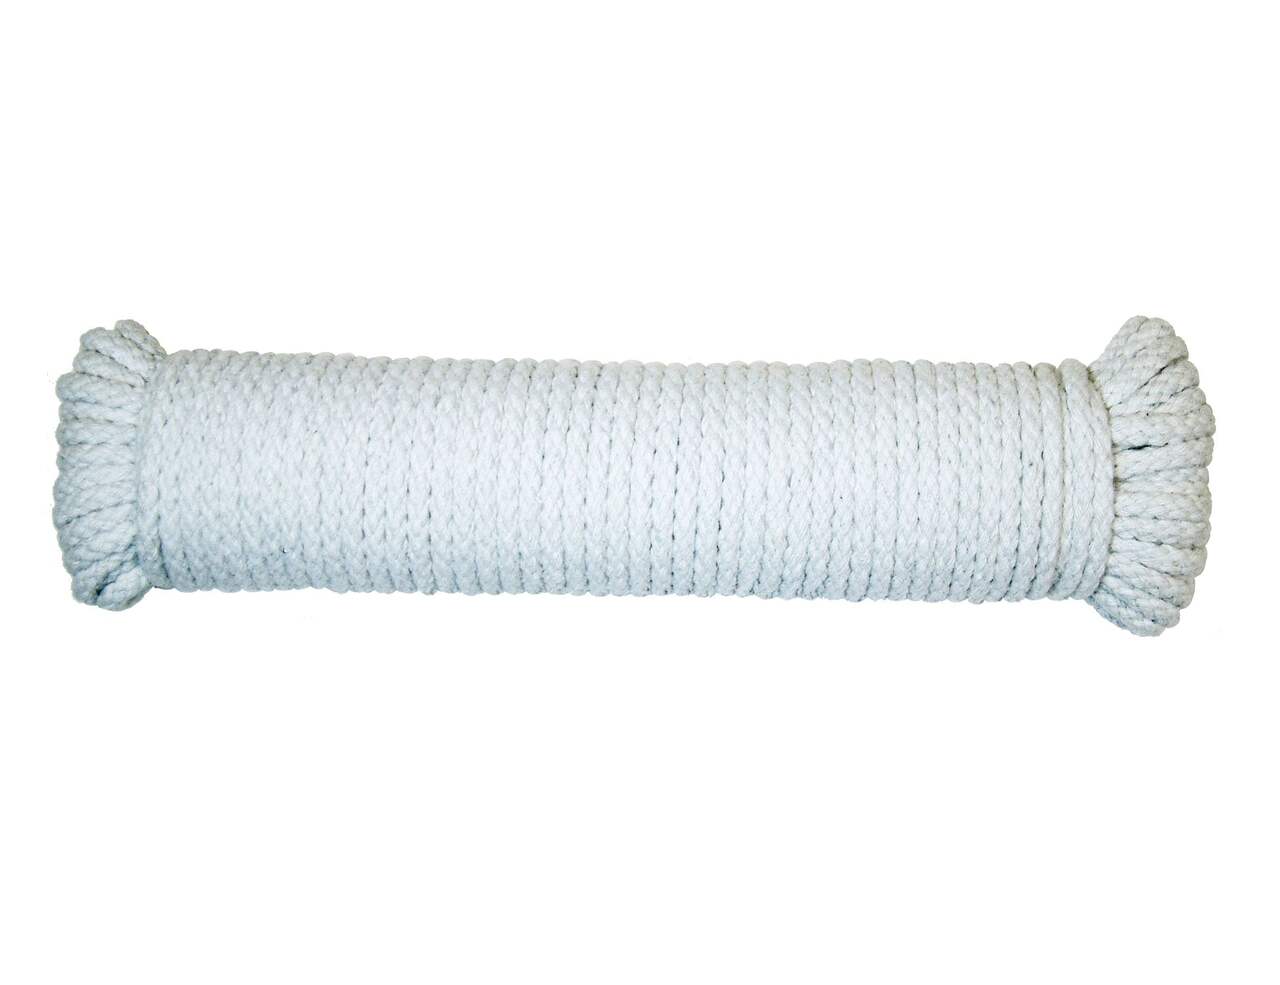 https://media-www.canadiantire.ca/product/fixing/hardware/general-hardware/0618559/clothesline-cotton-3-16-x-50--4d453435-51c2-4752-89a3-e4f26a01ff08-jpgrendition.jpg?imdensity=1&imwidth=640&impolicy=mZoom